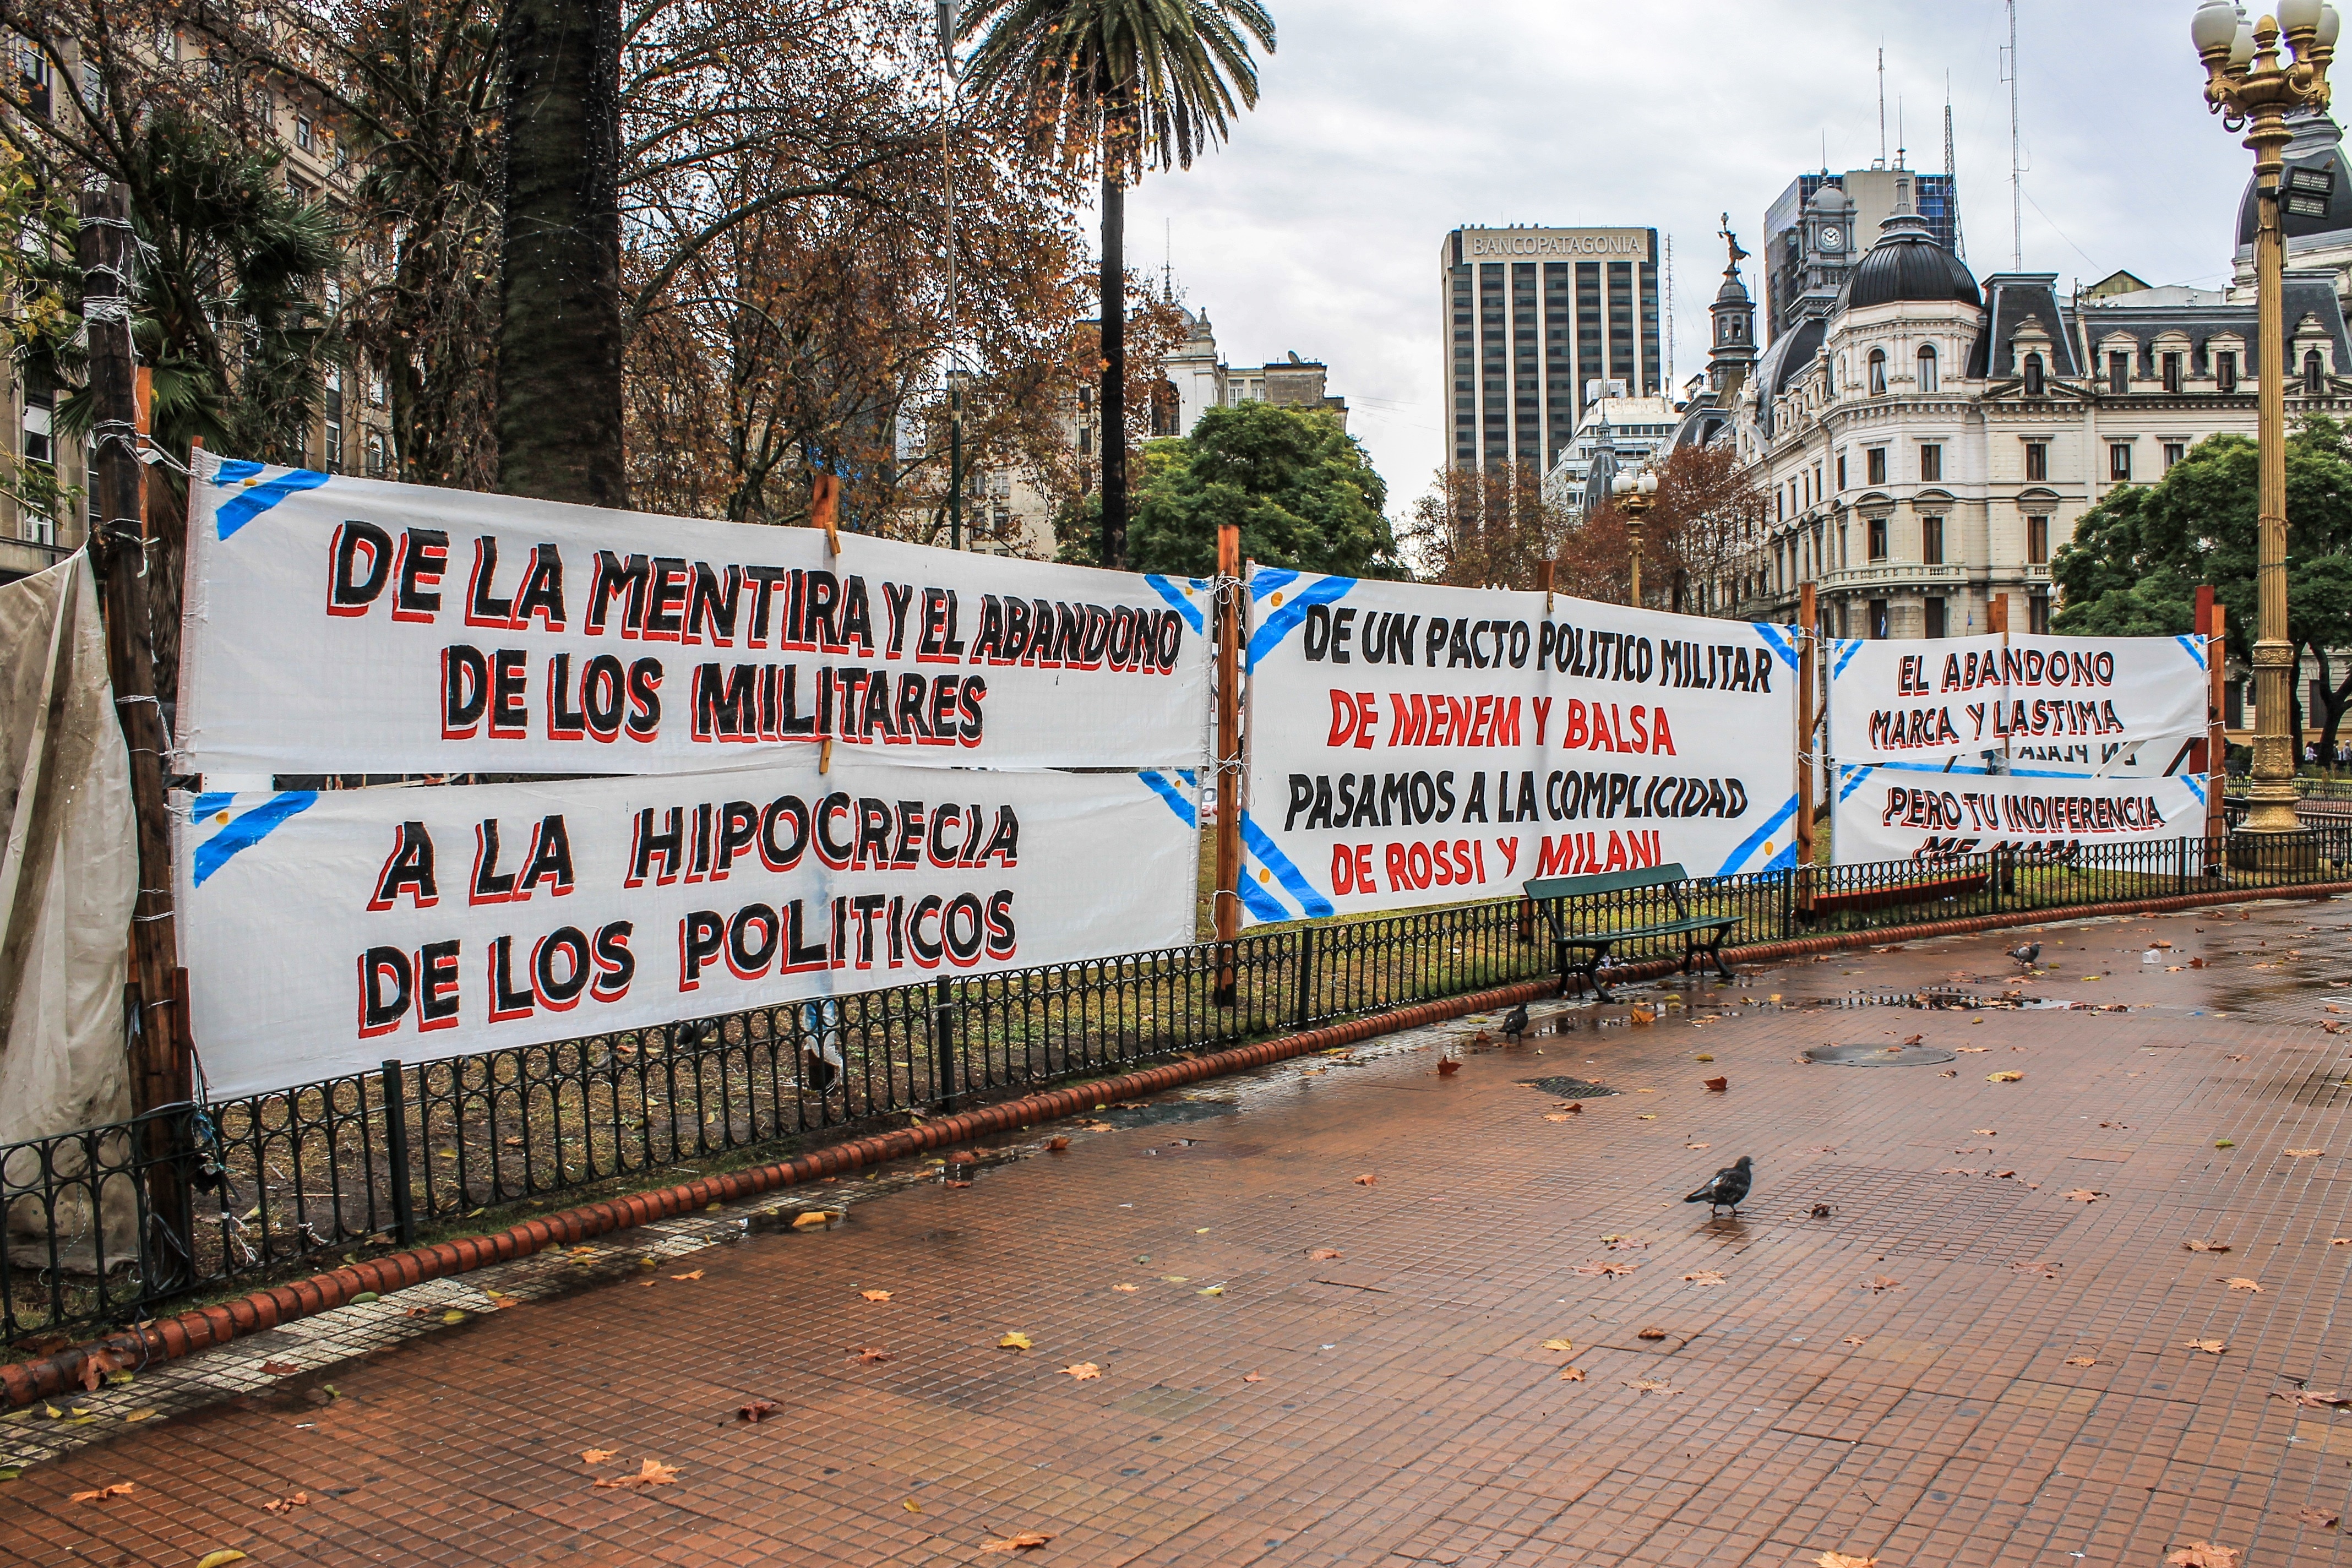 Protest In Argentina, Buenos Aires, text, graffiti